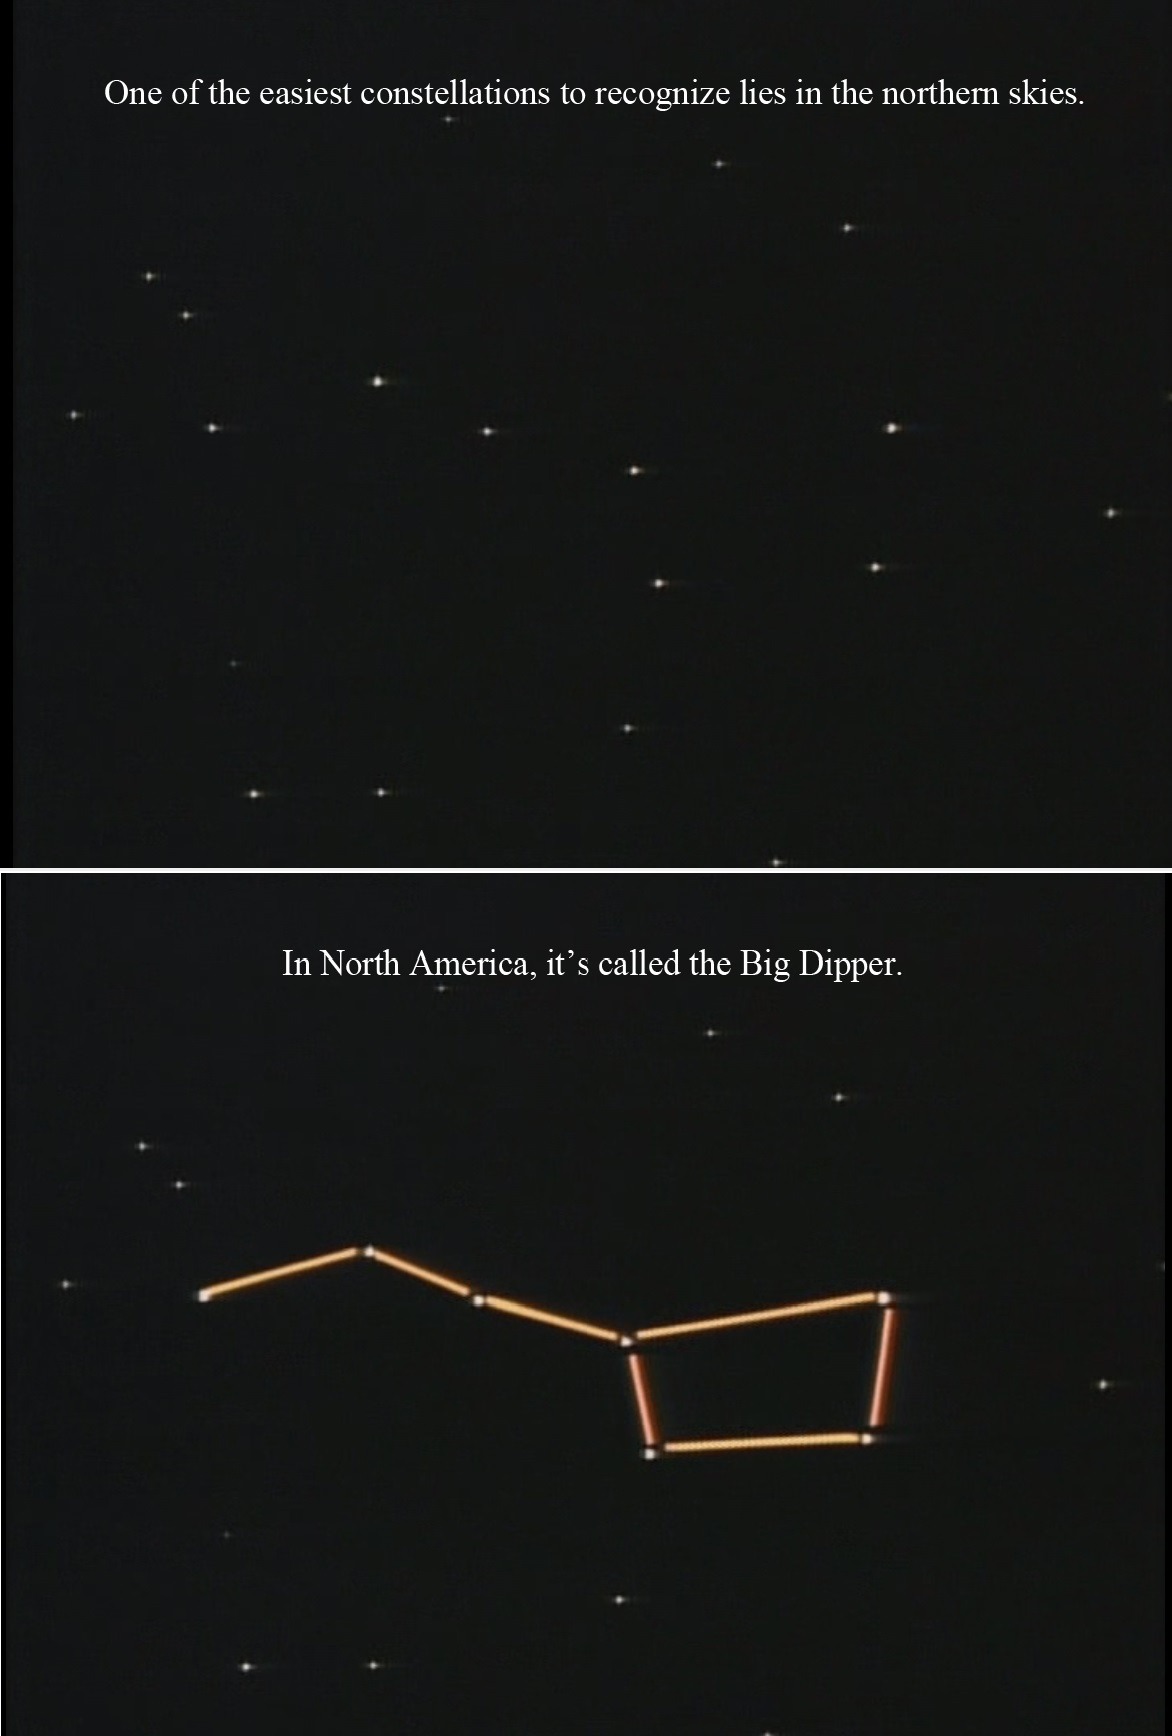 One of the easiest constellations to recognise lies in the northern skies. In North America, it's called The Big Dipper